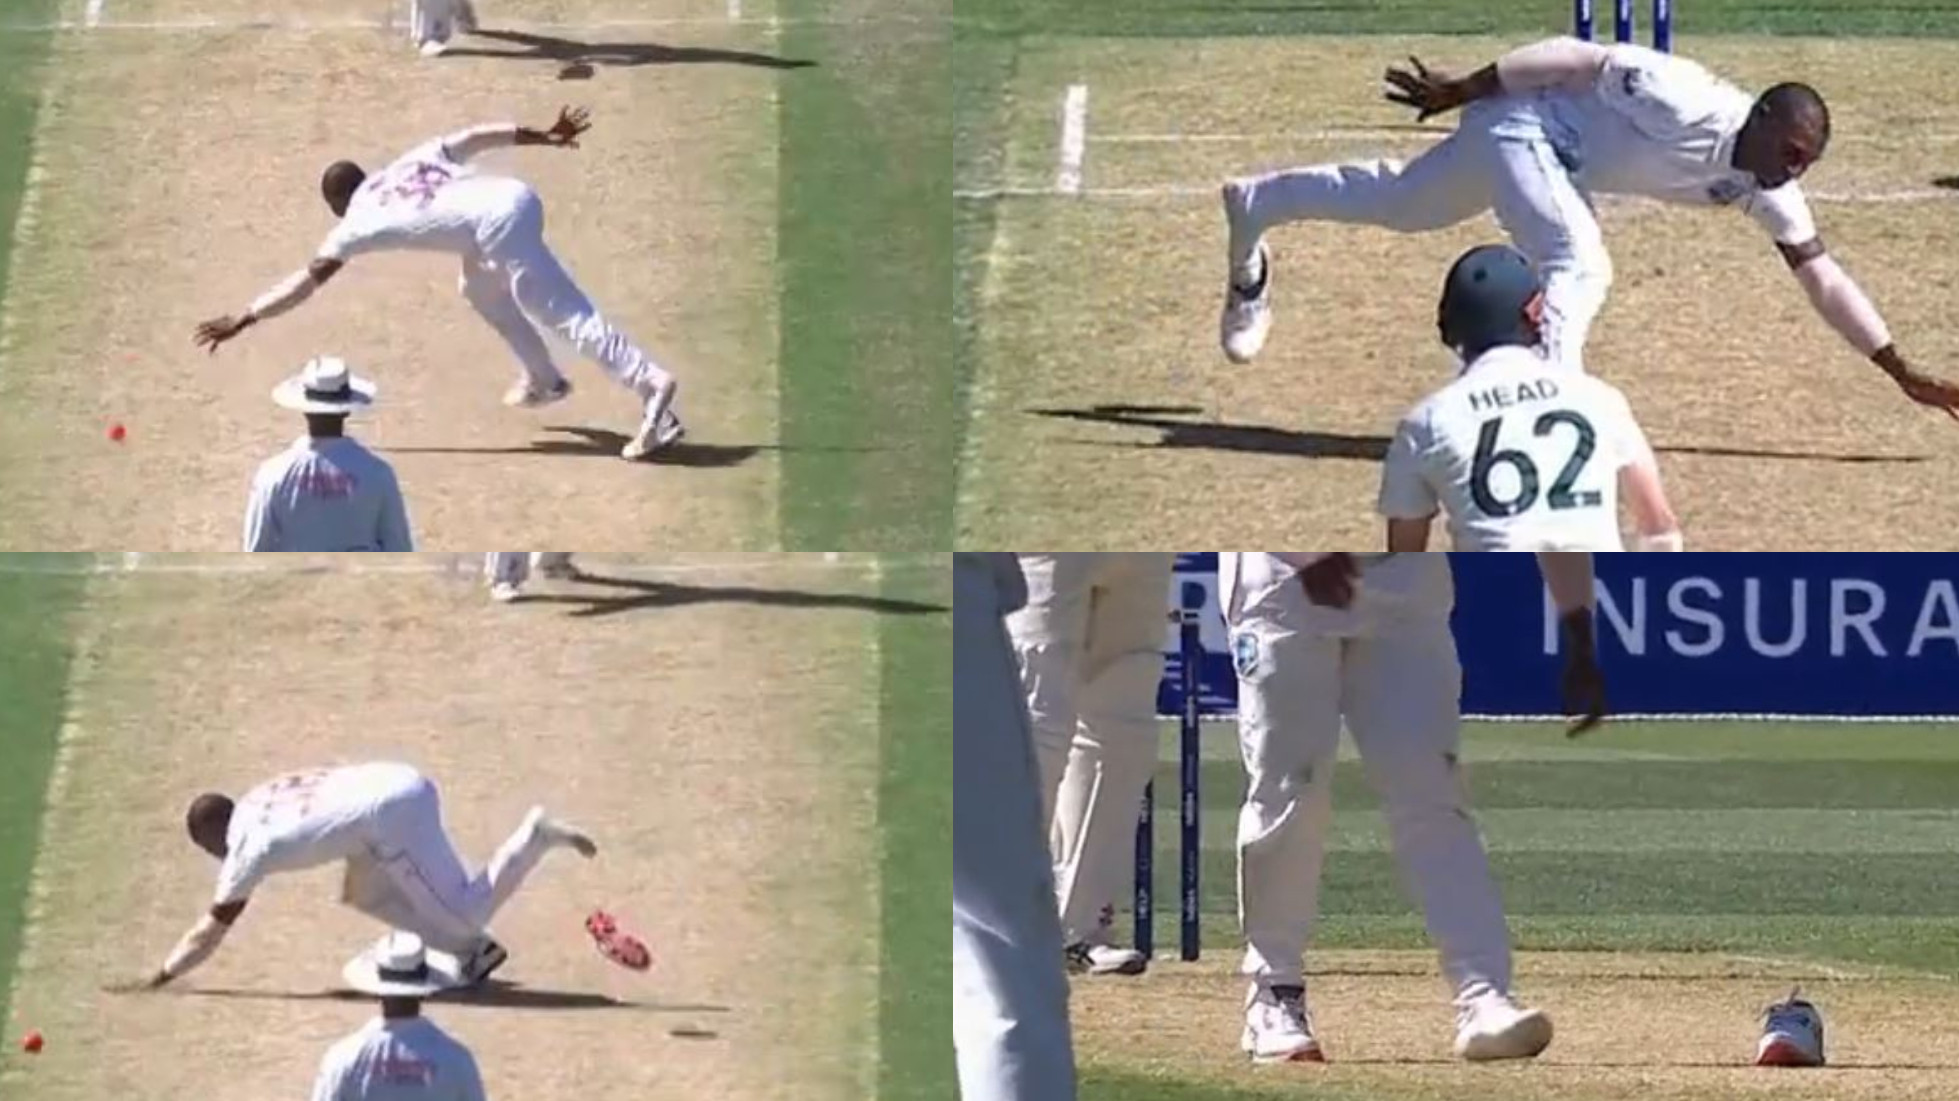 AUS v WI 2022: WATCH- Pacer Devon Thomas loses his shoe in follow-through after delivering a ball